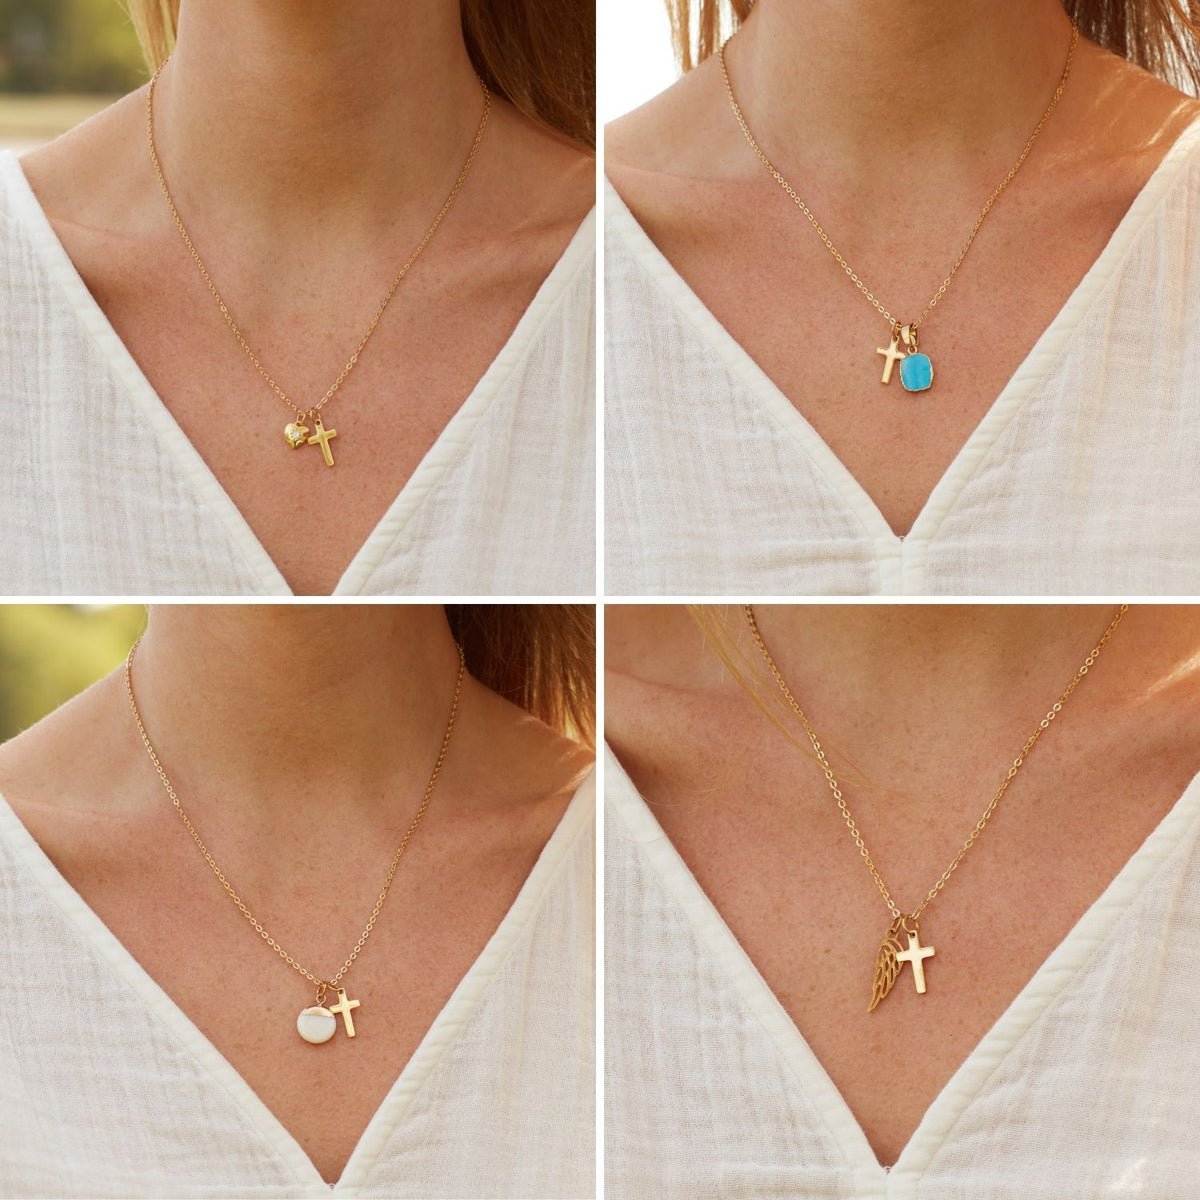 To The Mother of the Bride (From Groom) | Piece of Your Heart | Cross Necklace